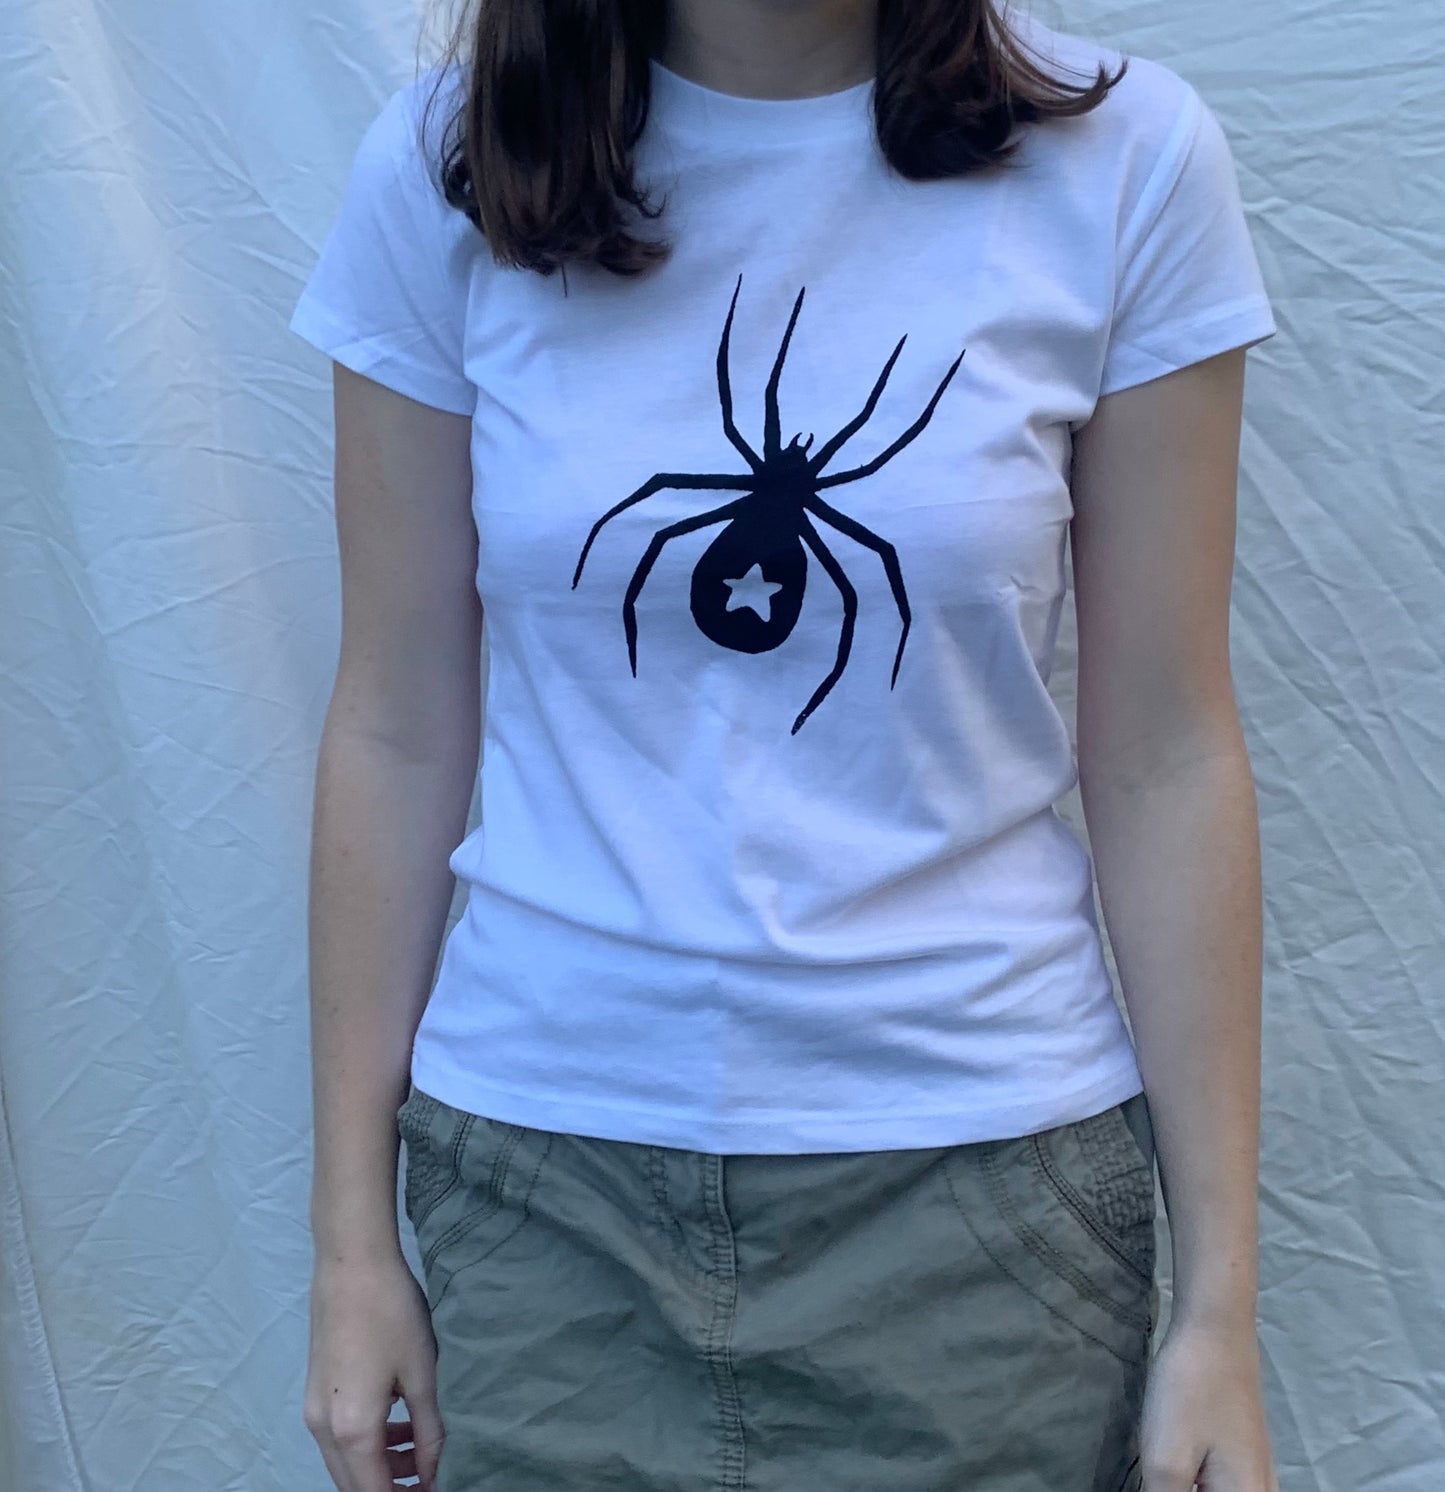 The Spider Baby Tee